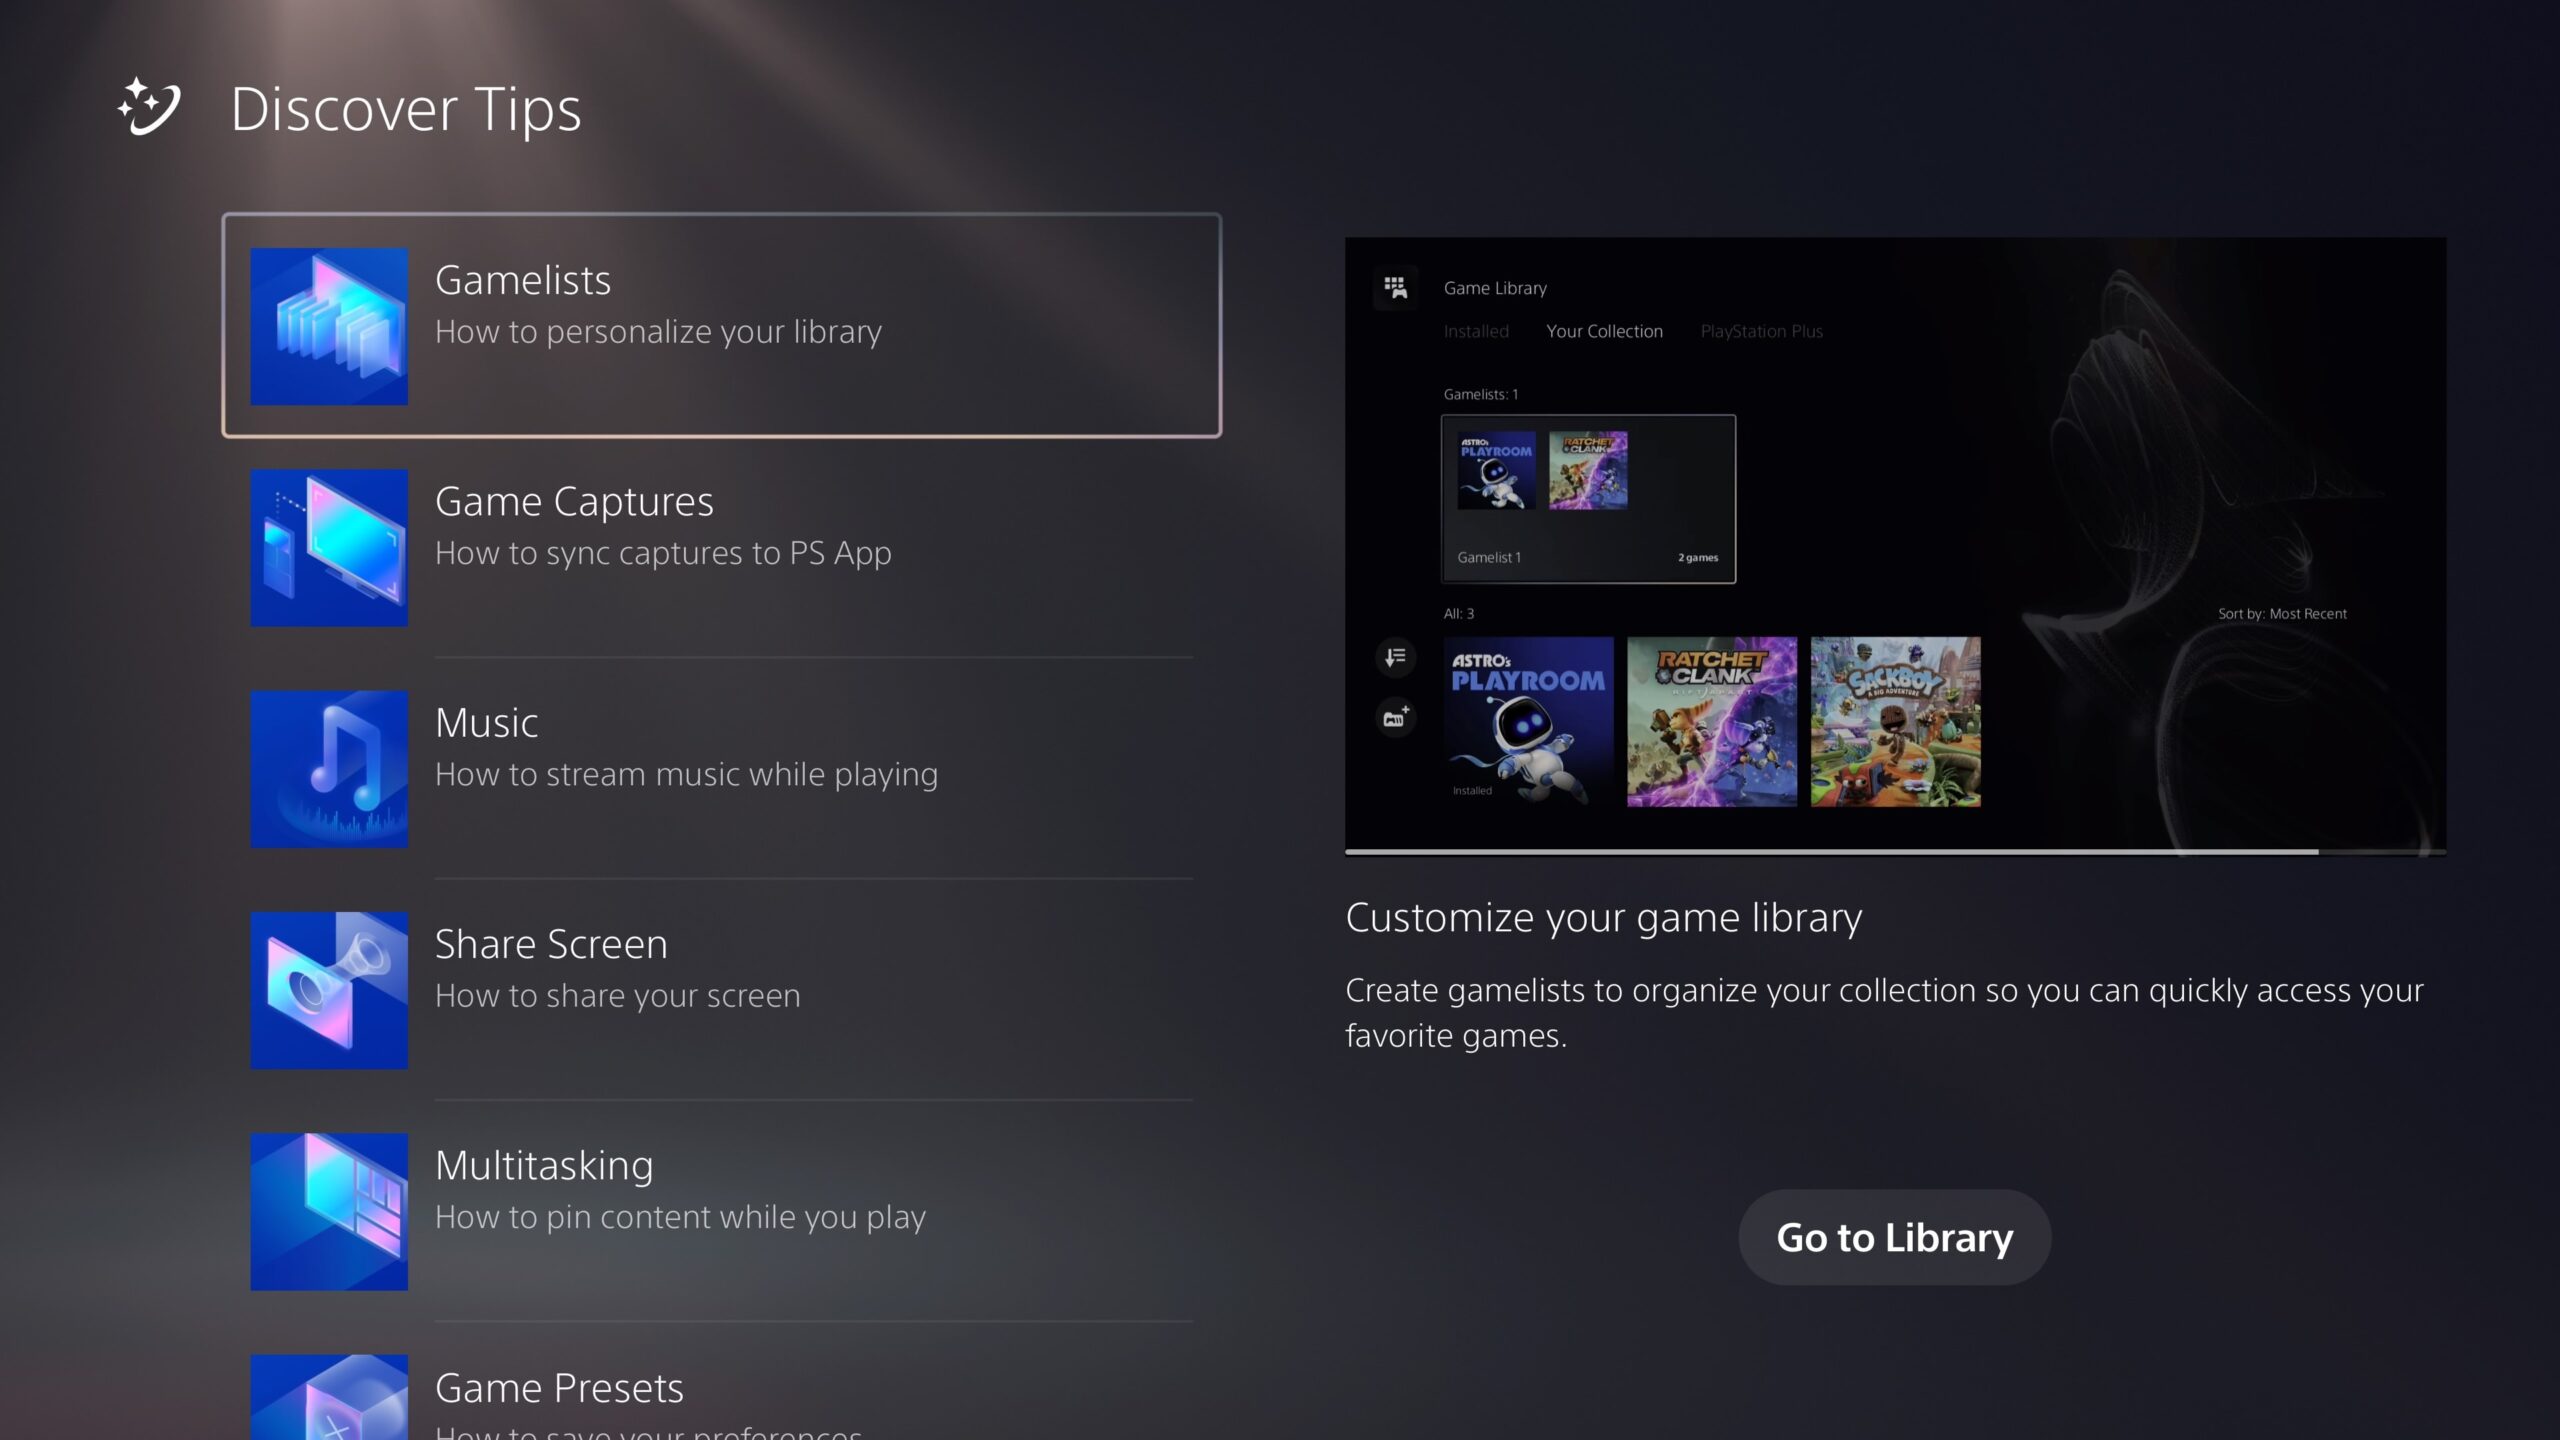  "PS5 UI screenshot of Discover Tips section in the settings menu"